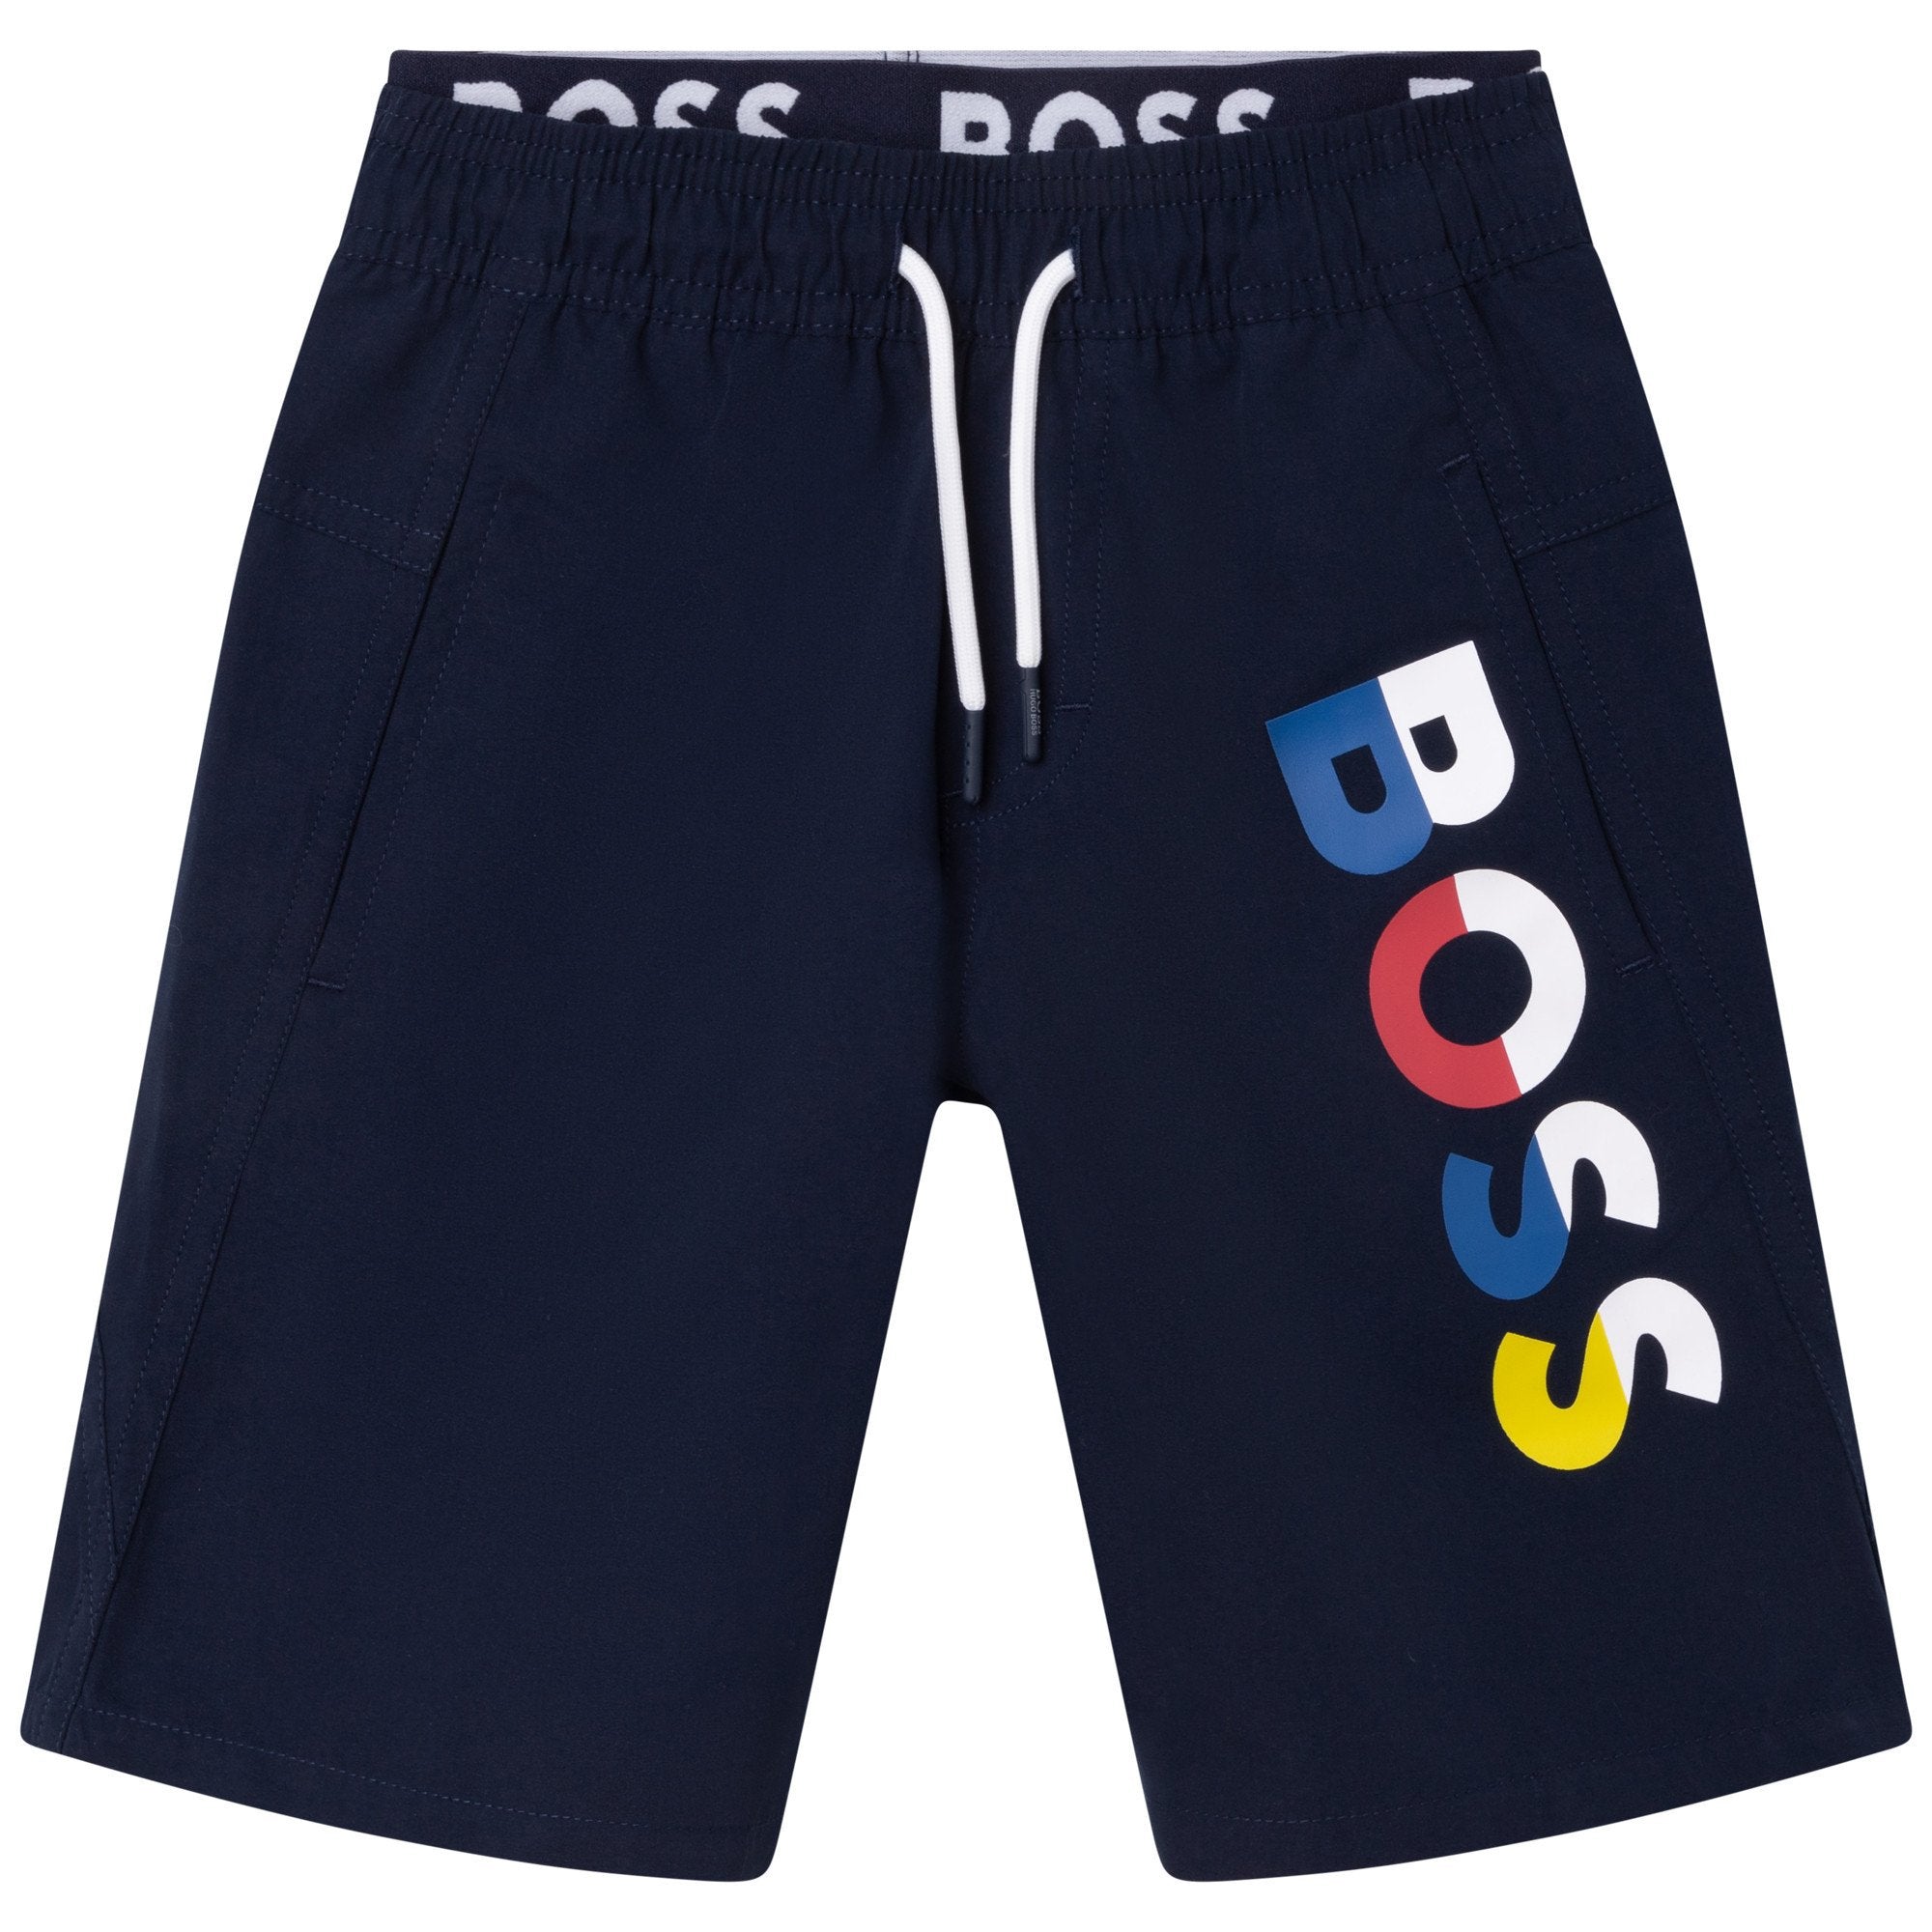 Junior boys' navy blue swim shorts by Hugo Boss with a multicoloured logo print, rubberized side pockets, and a double elasticated drawstring waistband